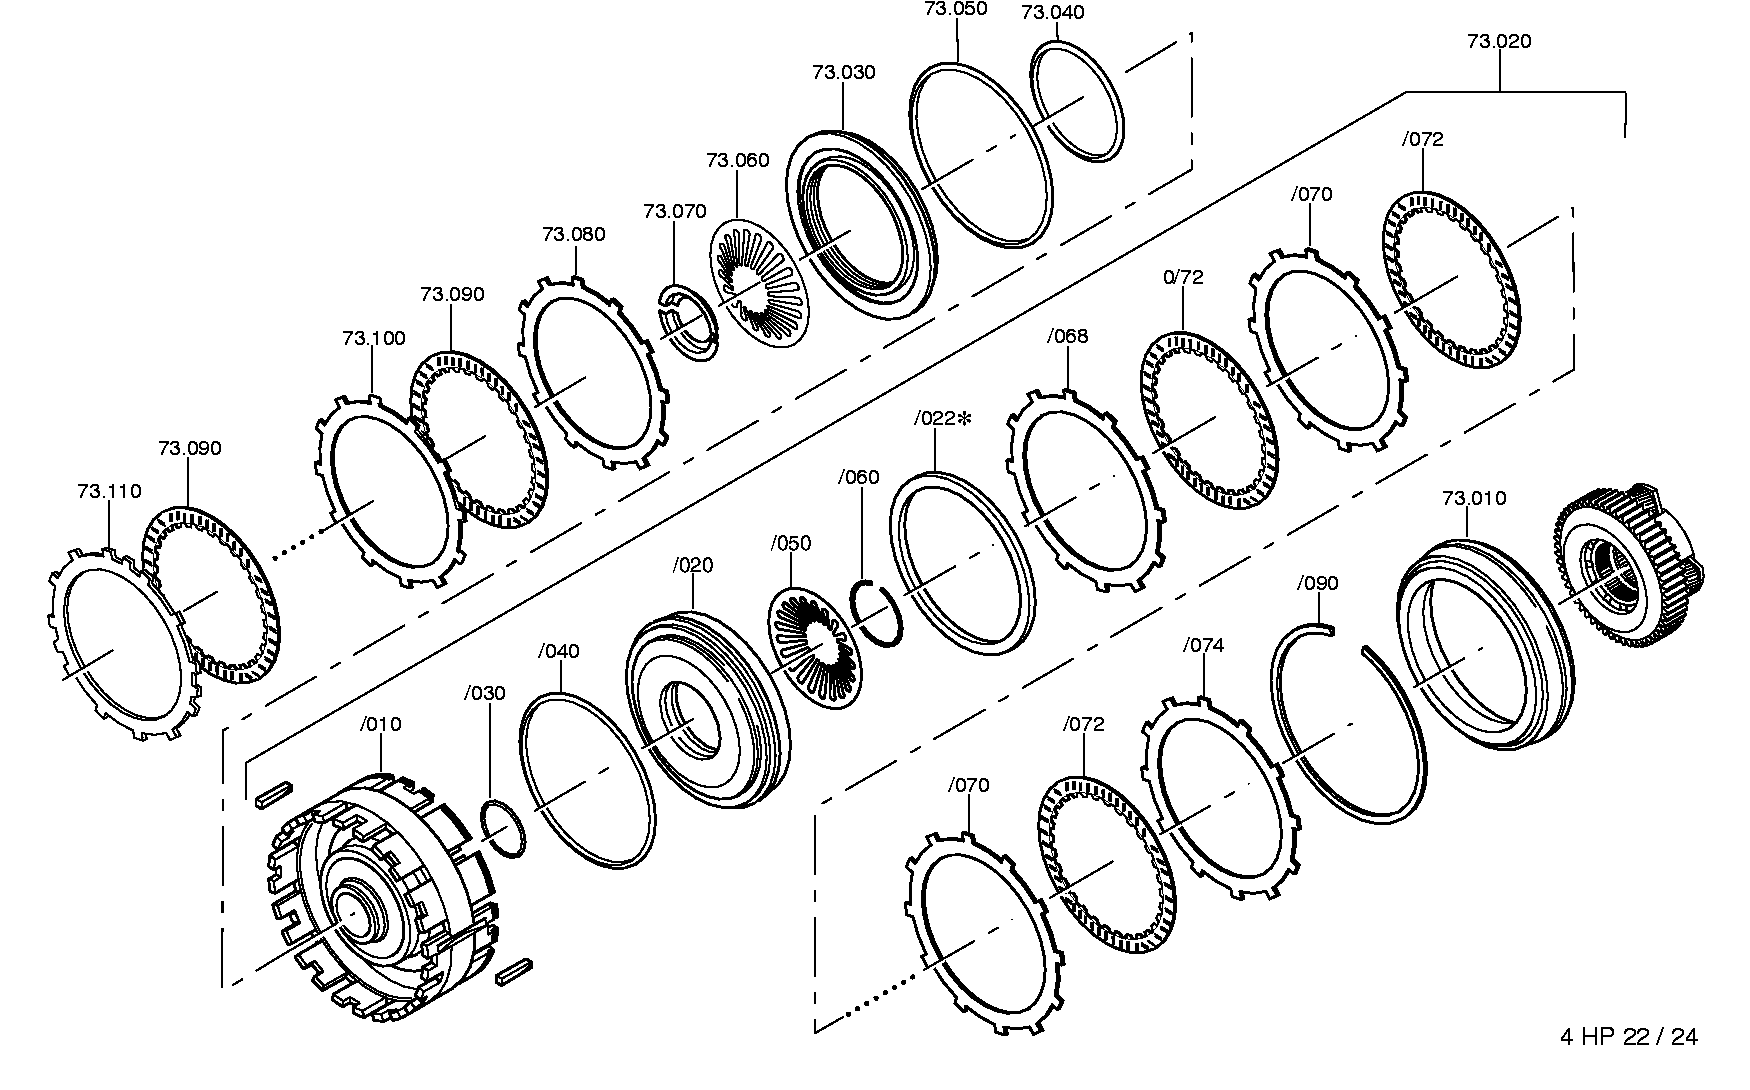 drawing for UNIPART 02JLM 10820 - ROUND SEALING RING (figure 1)